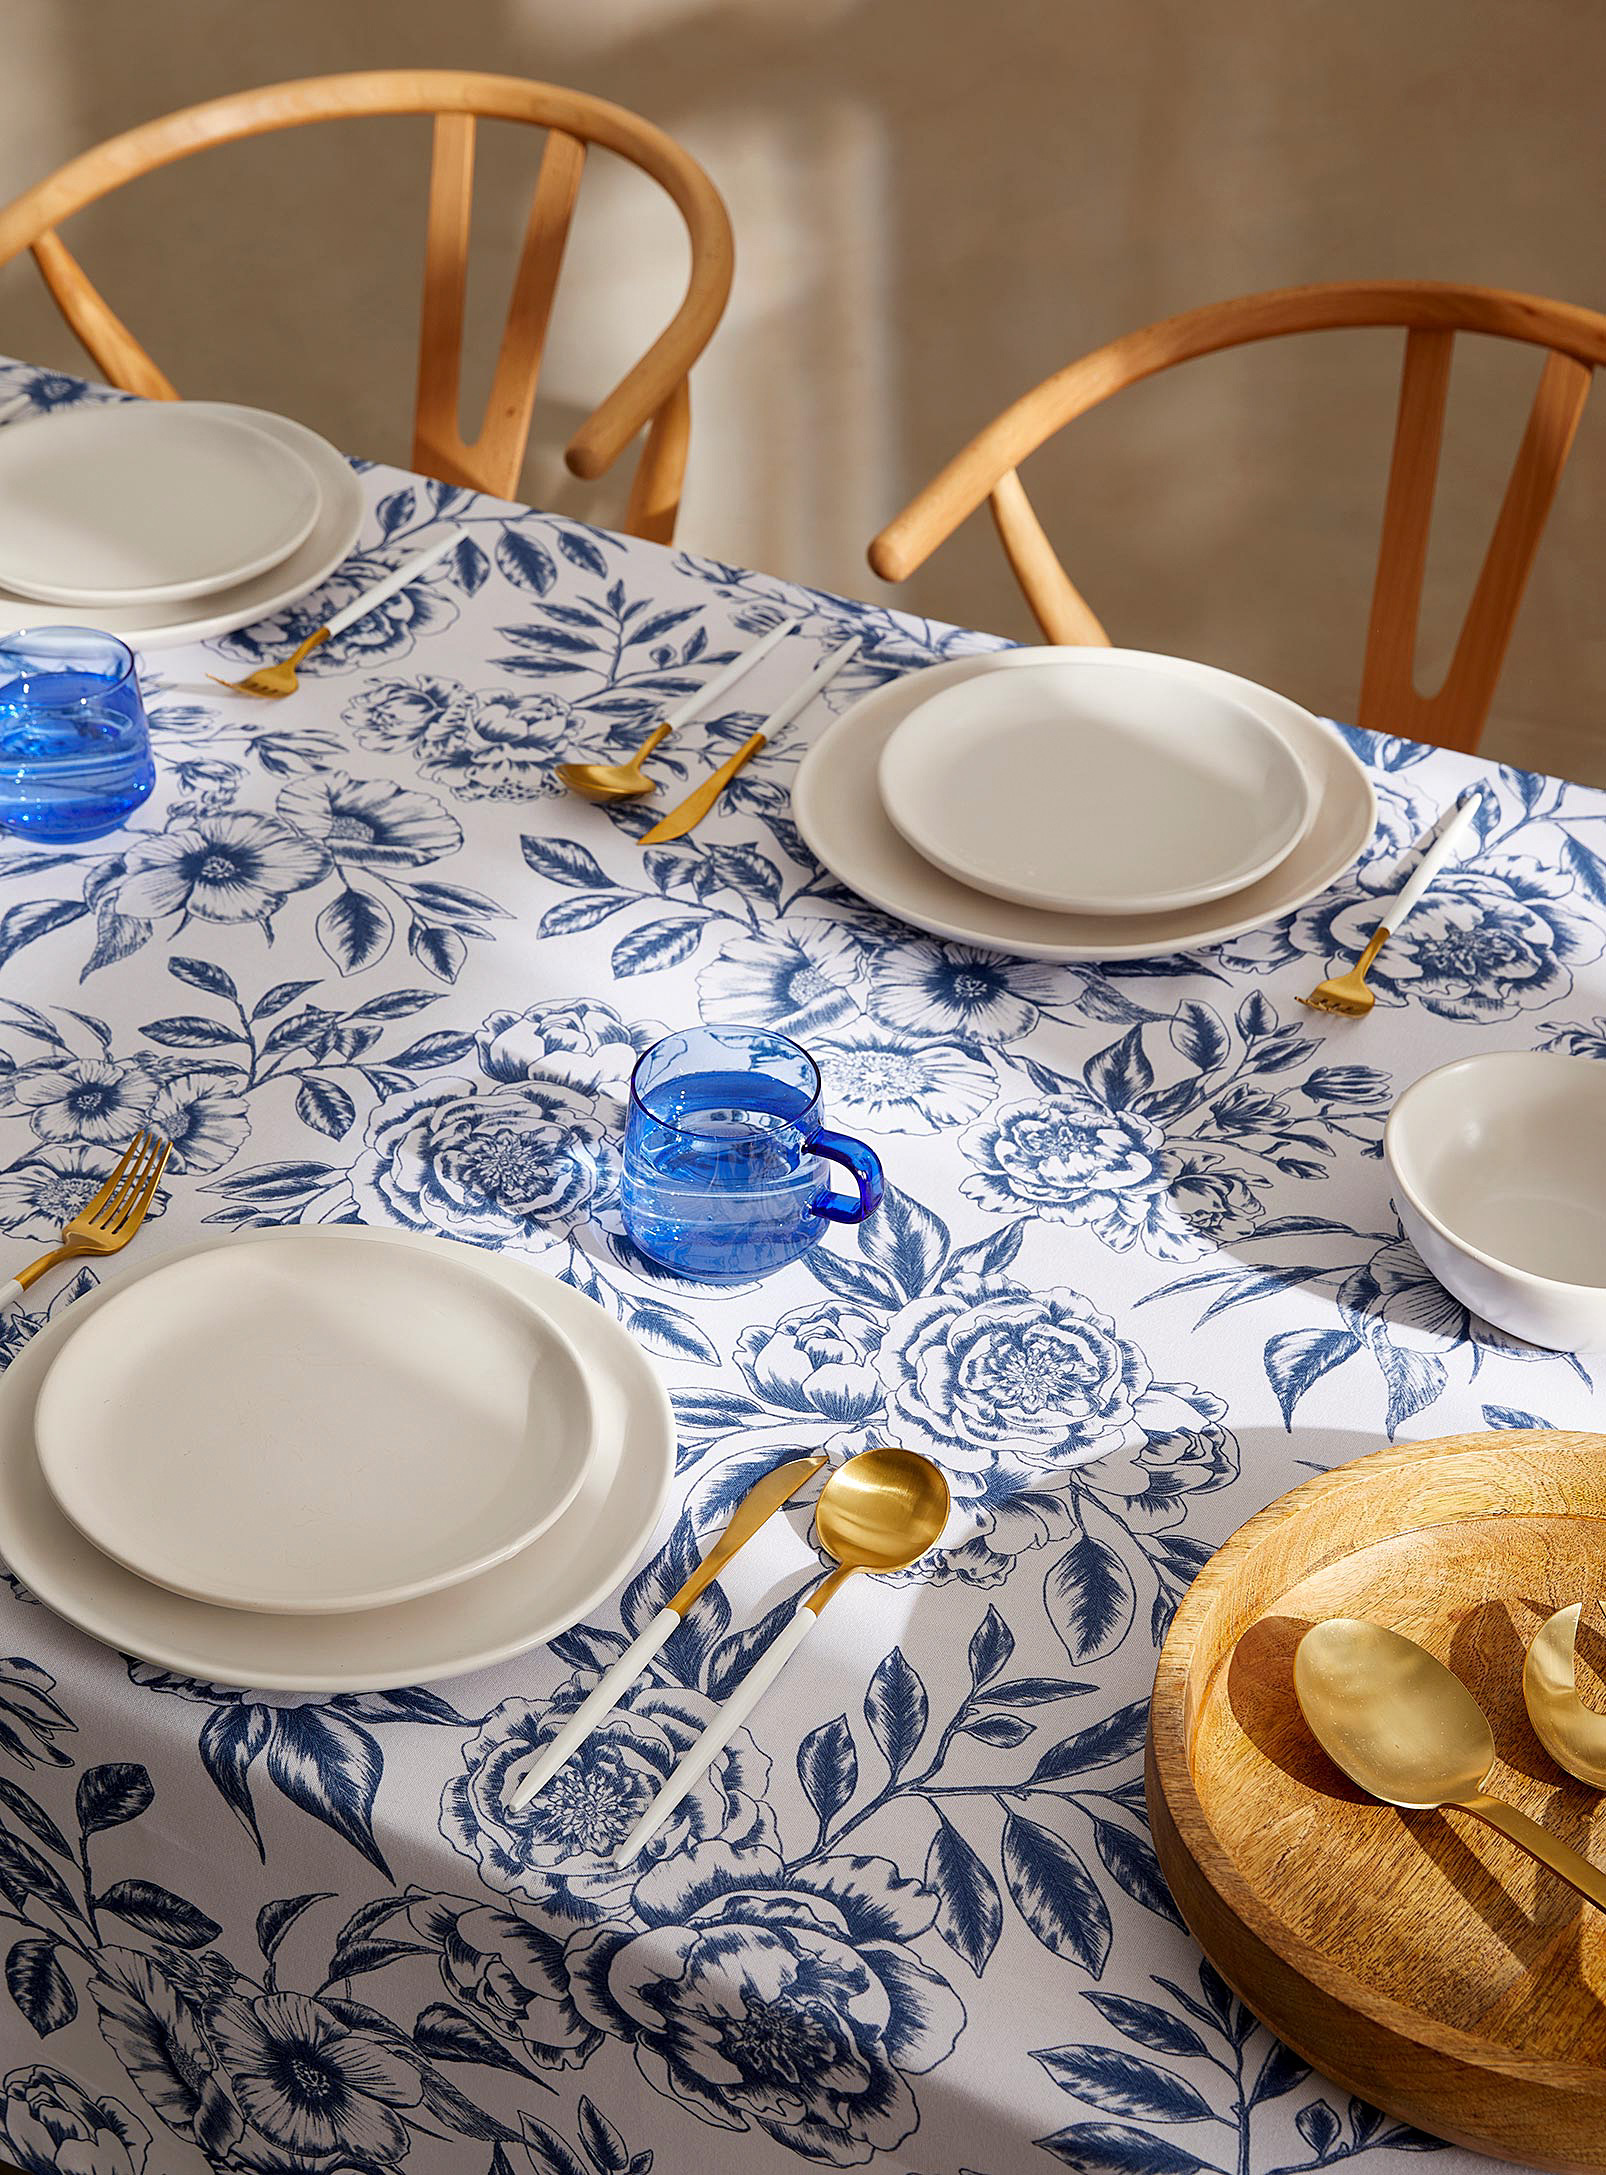 Simons Maison Toile De Jouy Tablecloth In Patterned White